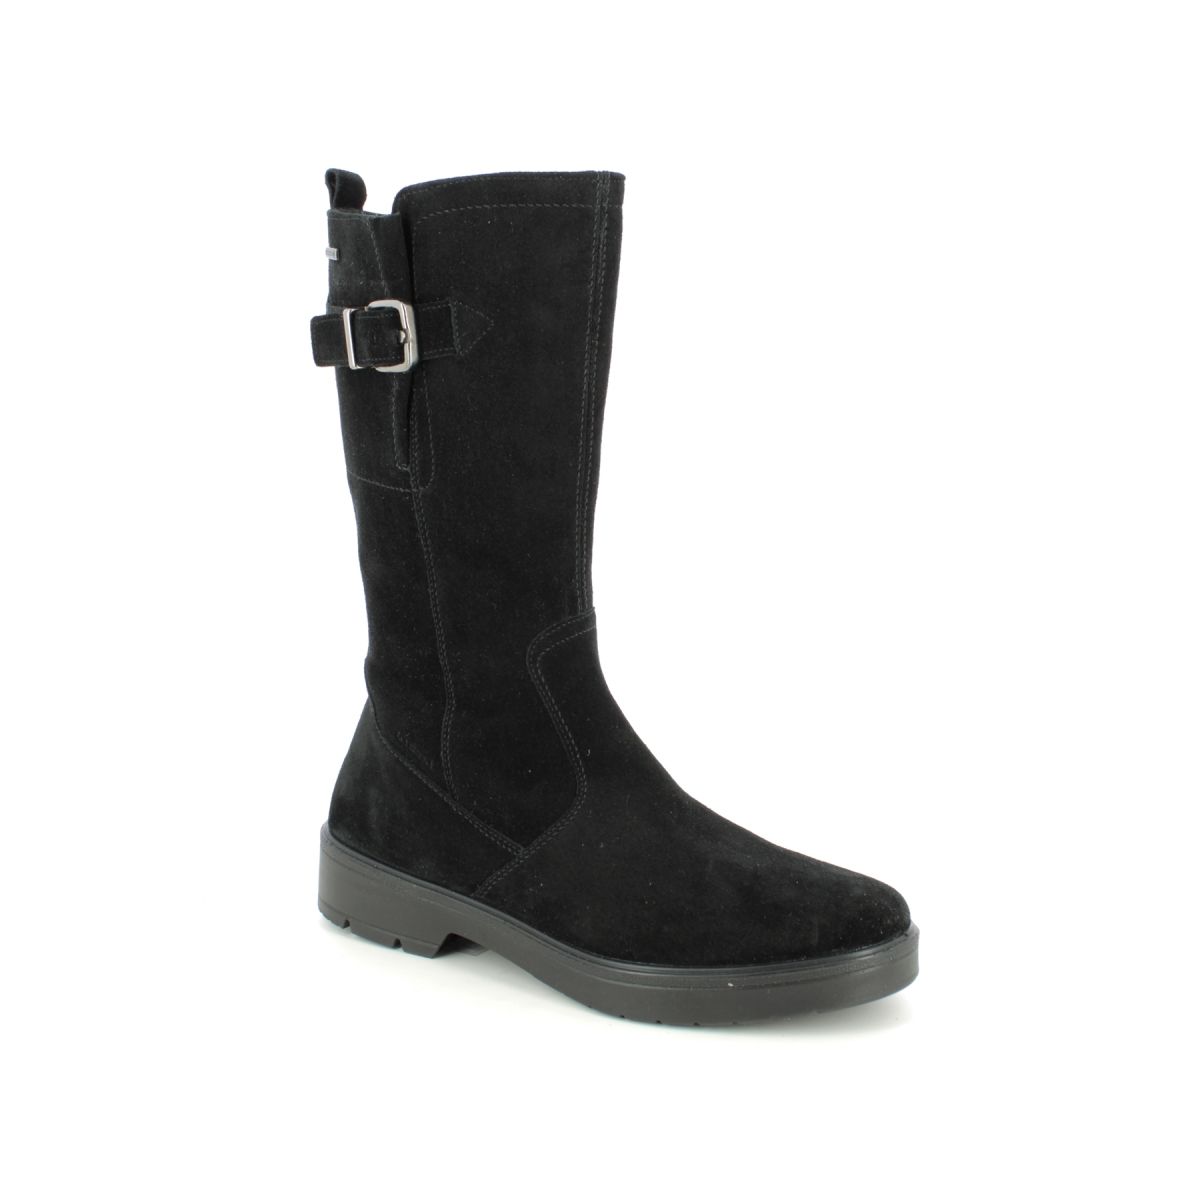 Legero Mystic Mid Gtx Black Suede Womens Mid Calf Boots 2000196-0000 In Size 5.5 In Plain Black Suede